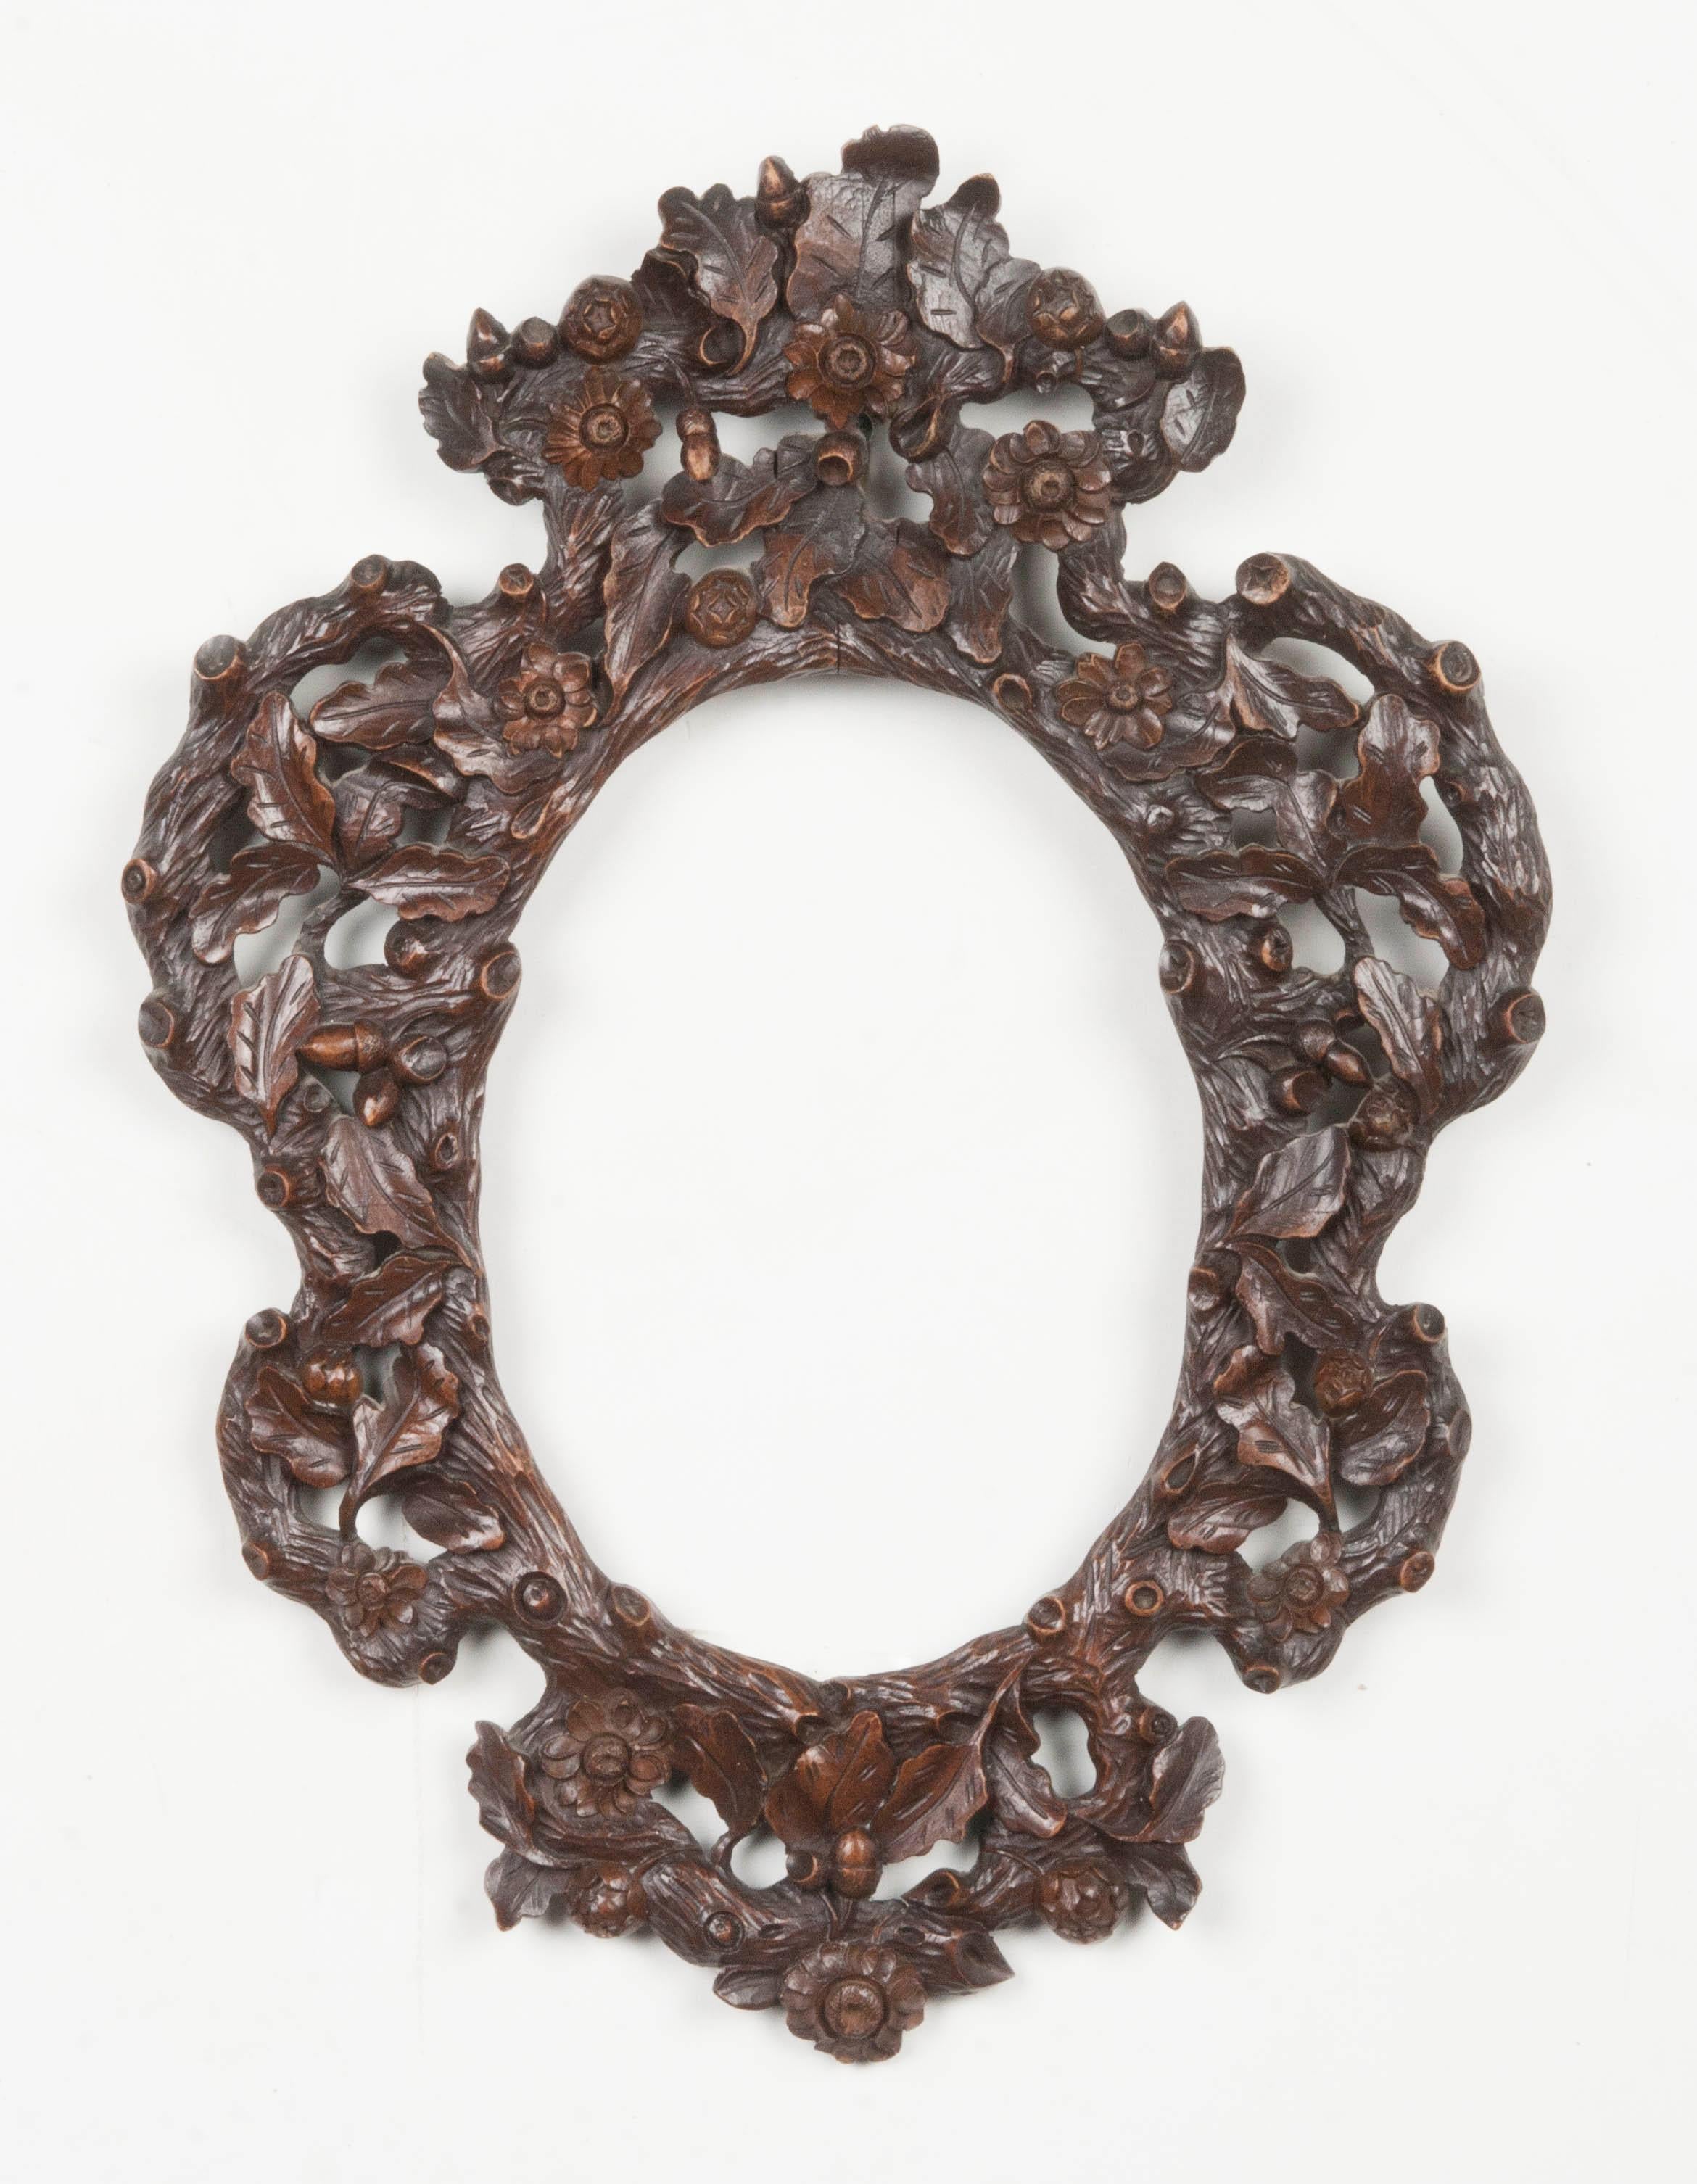 Rich and refined wood-carved photo frame. A typical example of the Black Forest style, decorated with leaves, branches and acorns.
The frame has a beautiful patina.